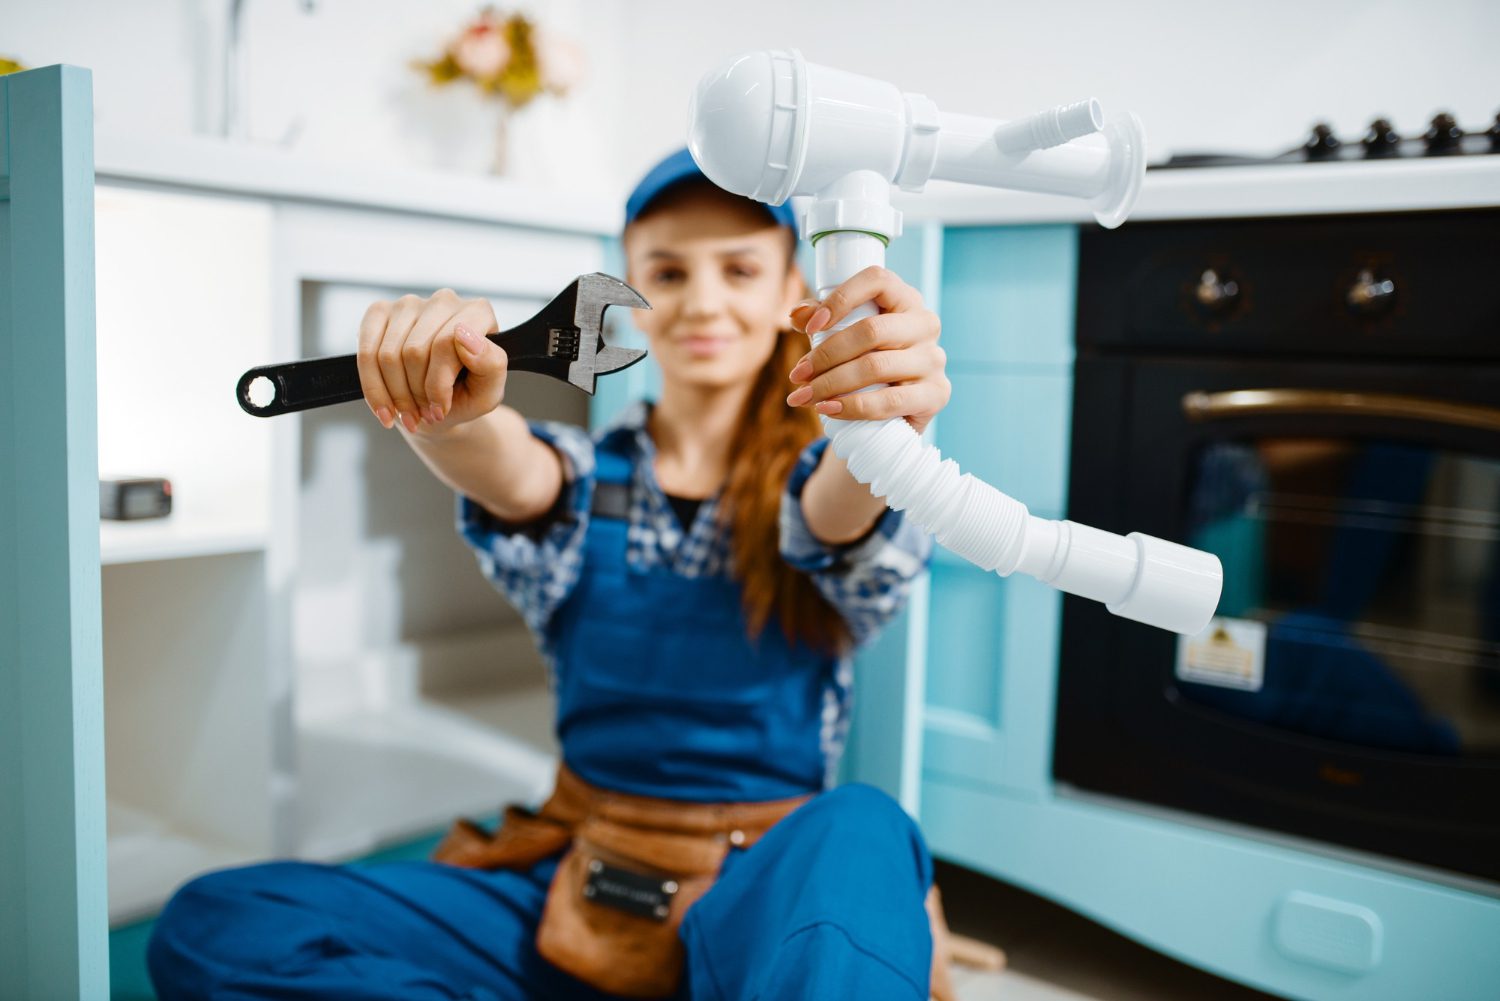 young-female-plumber-uniform-shows-wrench-pipe-kitchen-handywoman-with-toolbag-repair-sink-sanitary-equipment-service-home